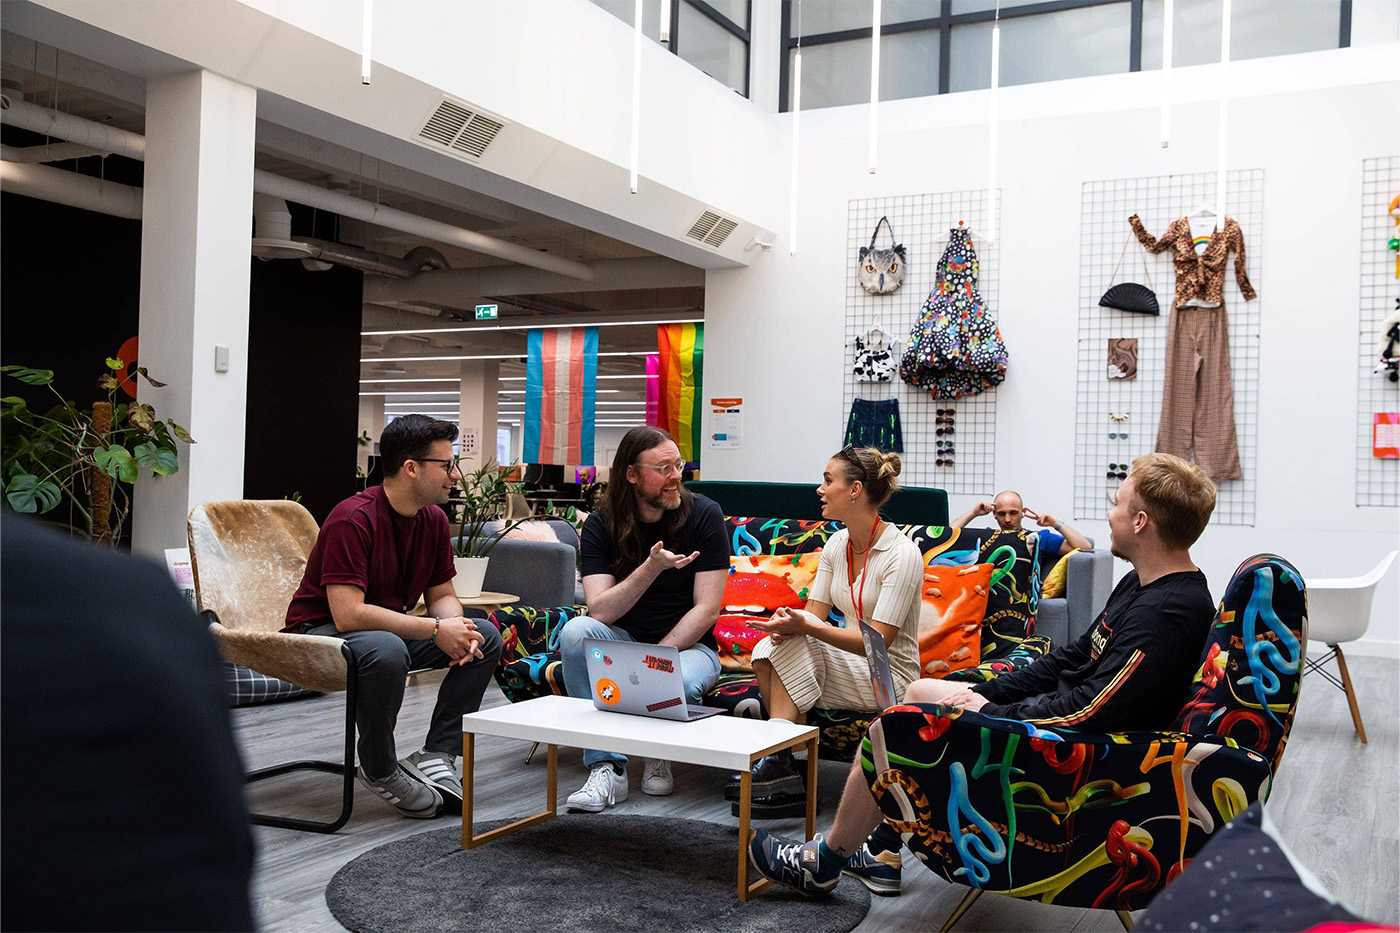 Four colleagues sit and chat in a vibrant, fashionable office